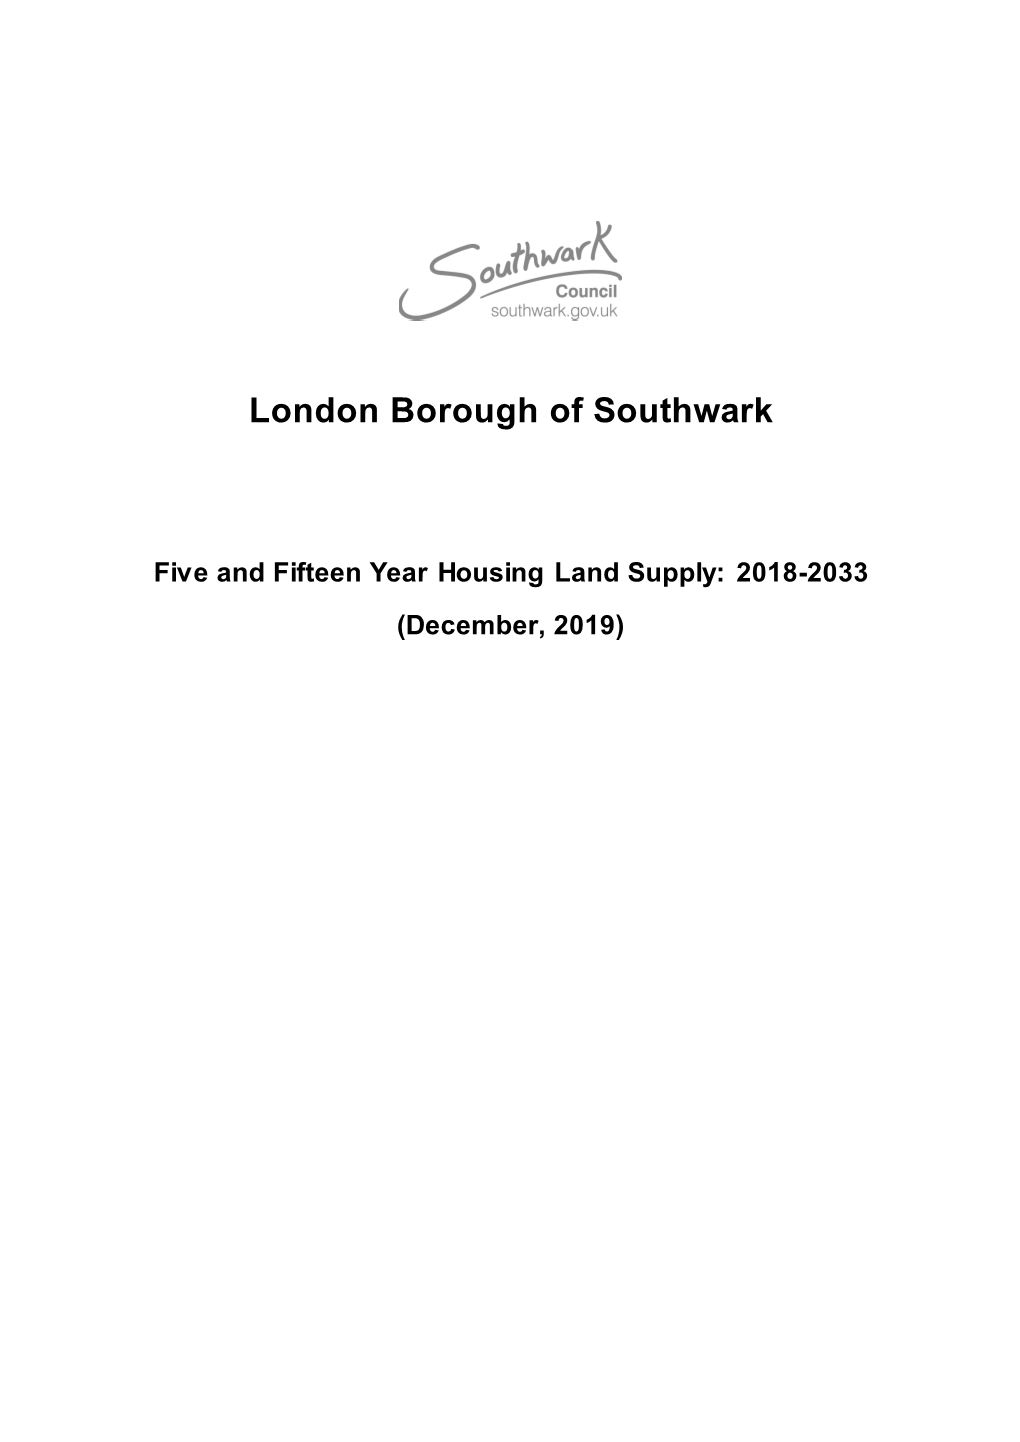 Five and Fifteen Year Housing Land Supply: 2018-2033 (December, 2019)